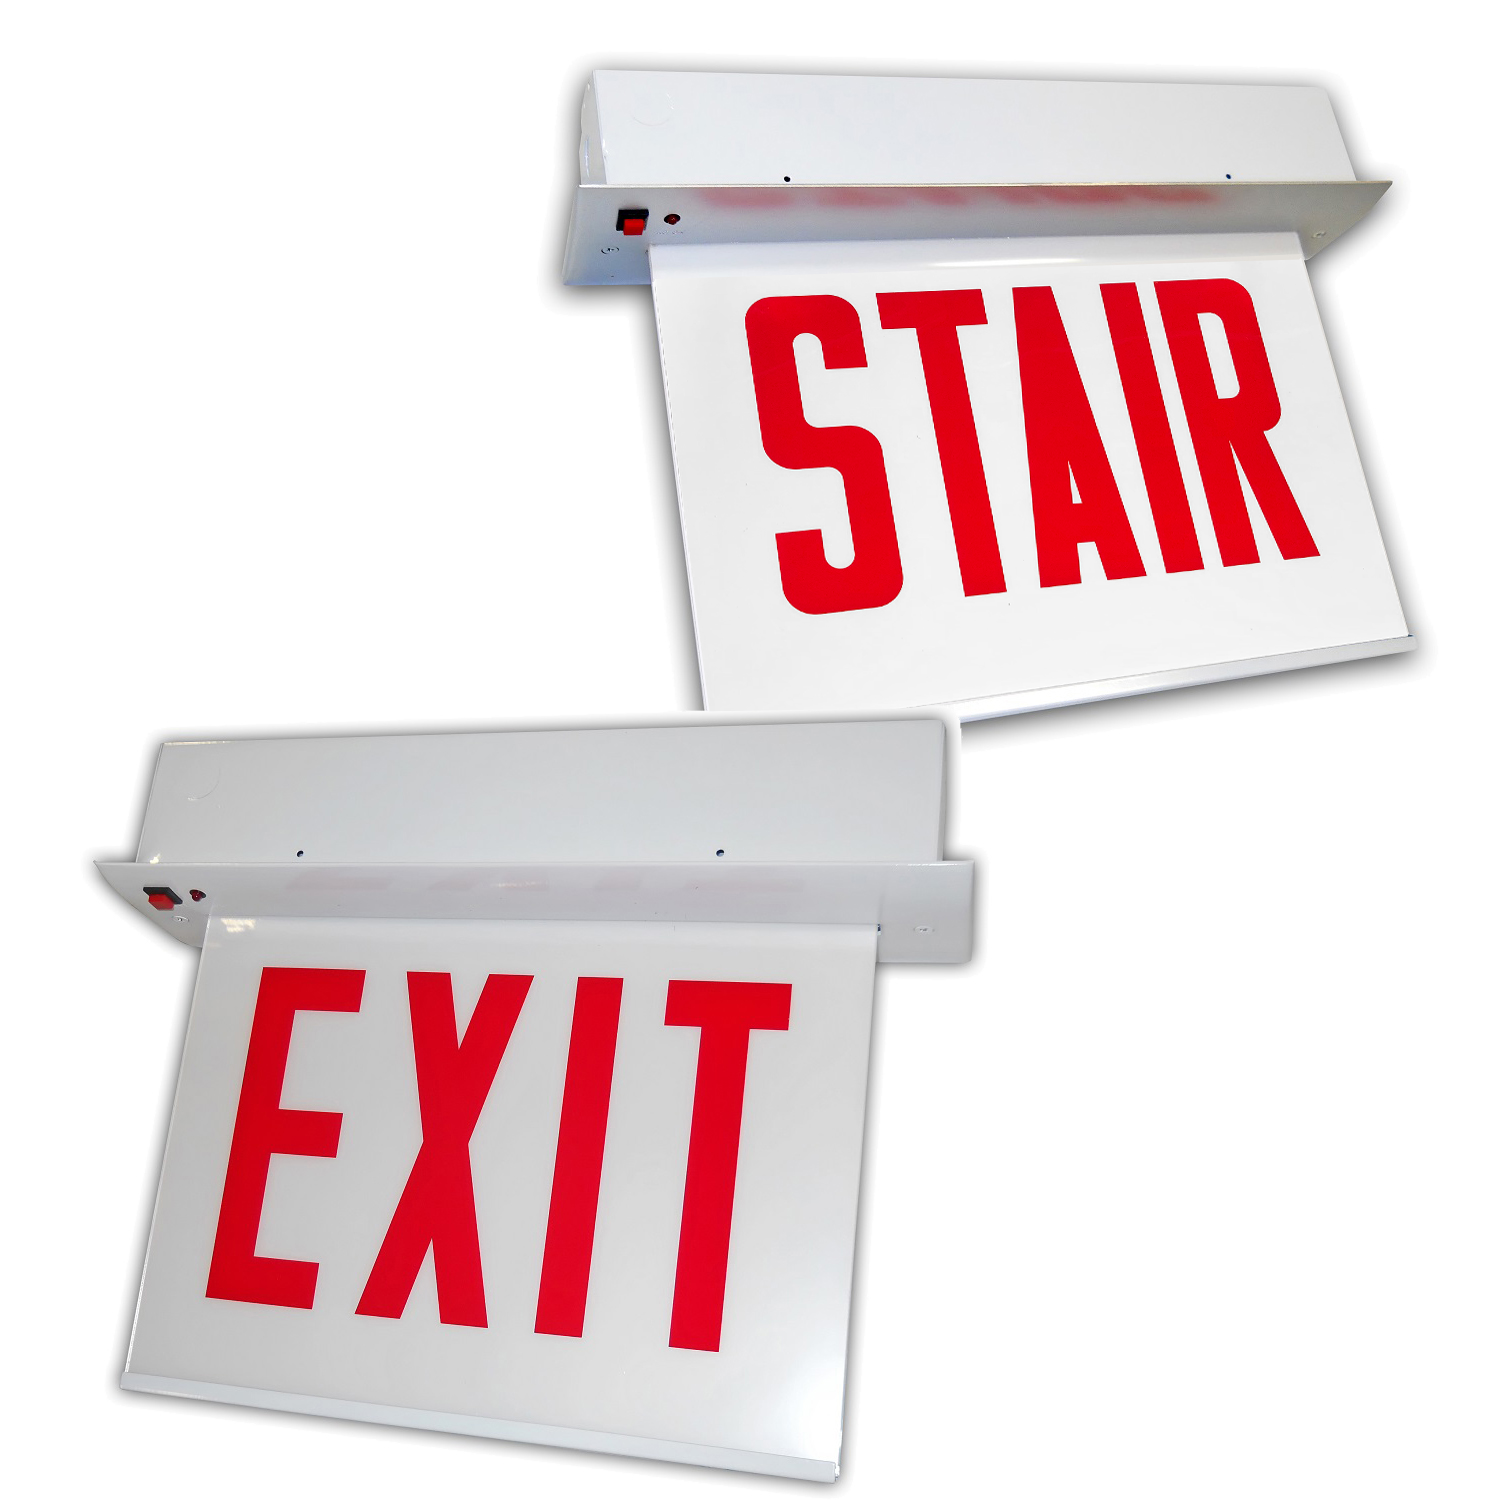 CHICAGO APPROVED RECESSED EDGELIT ALUMINUM EXIT/STAIR SIGN CARELZXTE